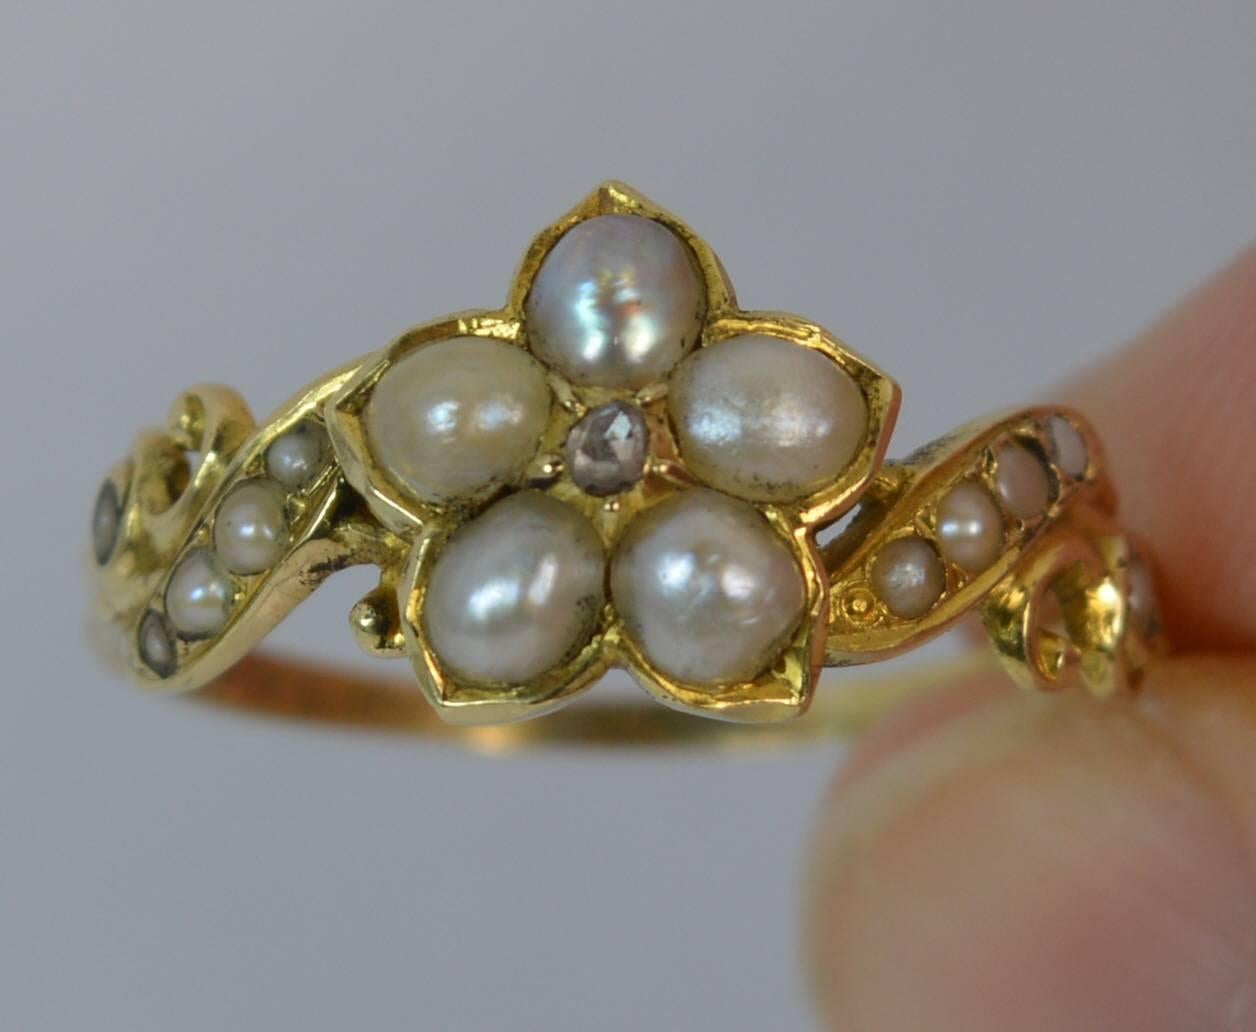 Early Victorian 1812 Georgian 18 Carat Gold Pearl and Diamond Daisy Cluster Mourning Ring